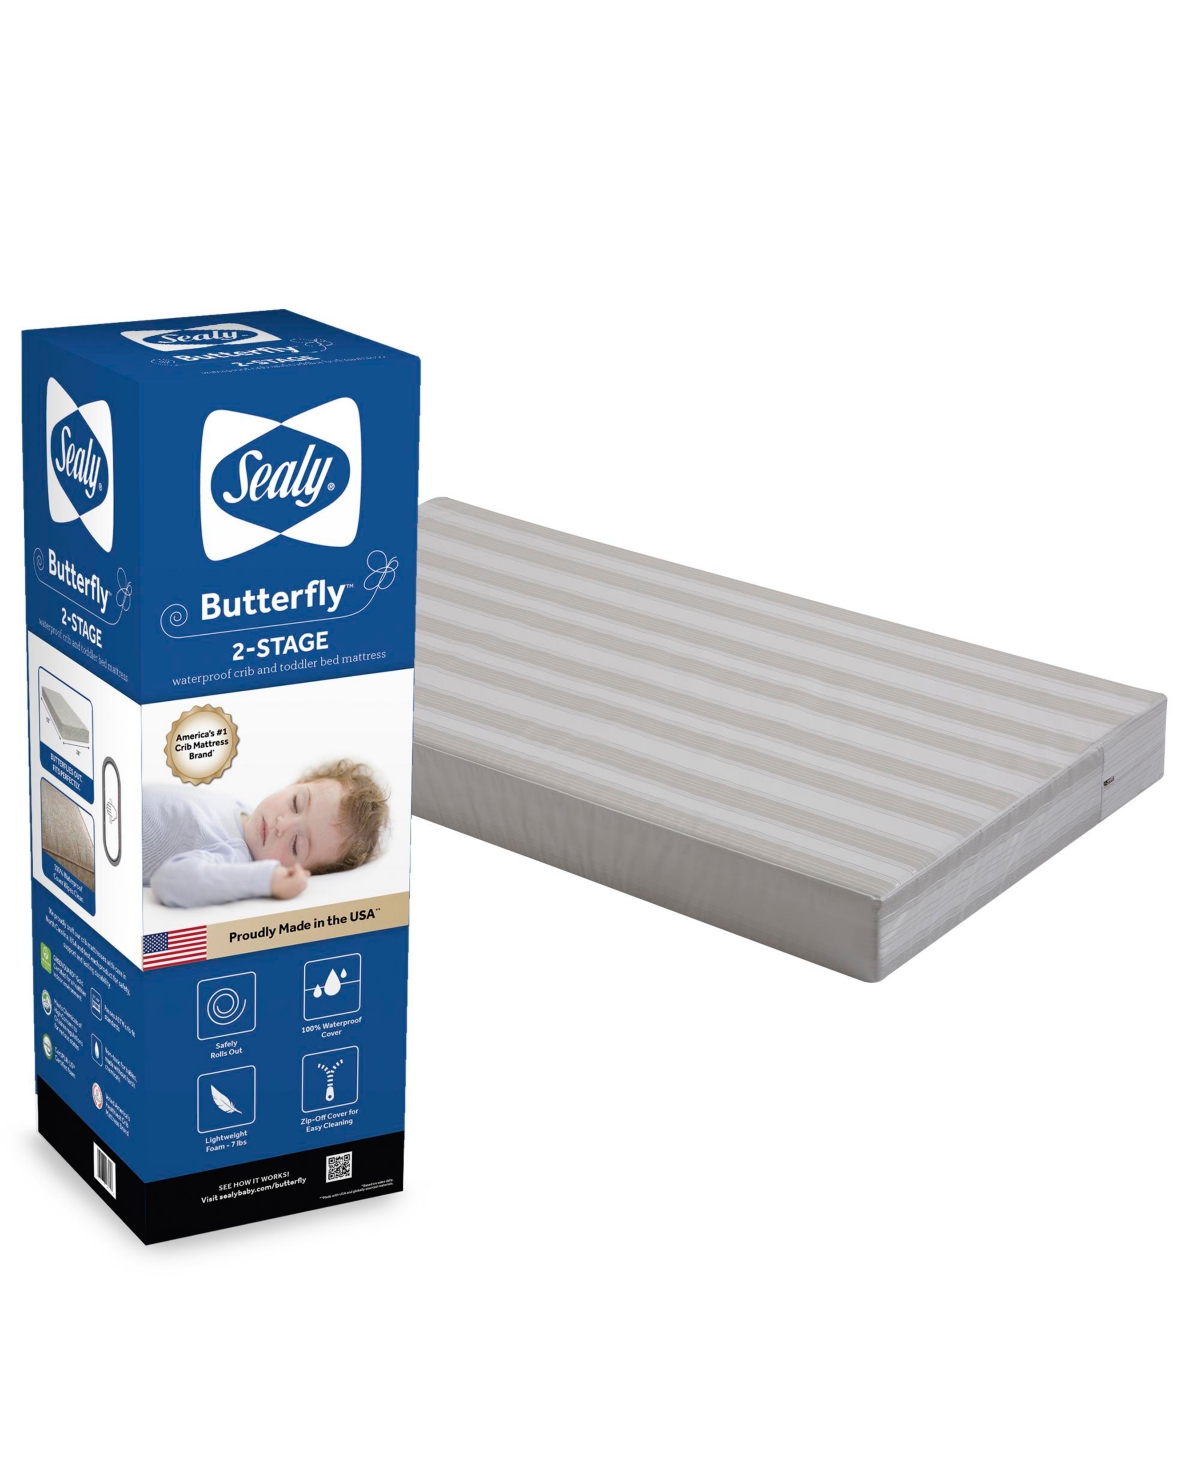 UPC 031878268049 product image for Seally Butterfly 2-Stage Waterproof Crib Mattress | upcitemdb.com